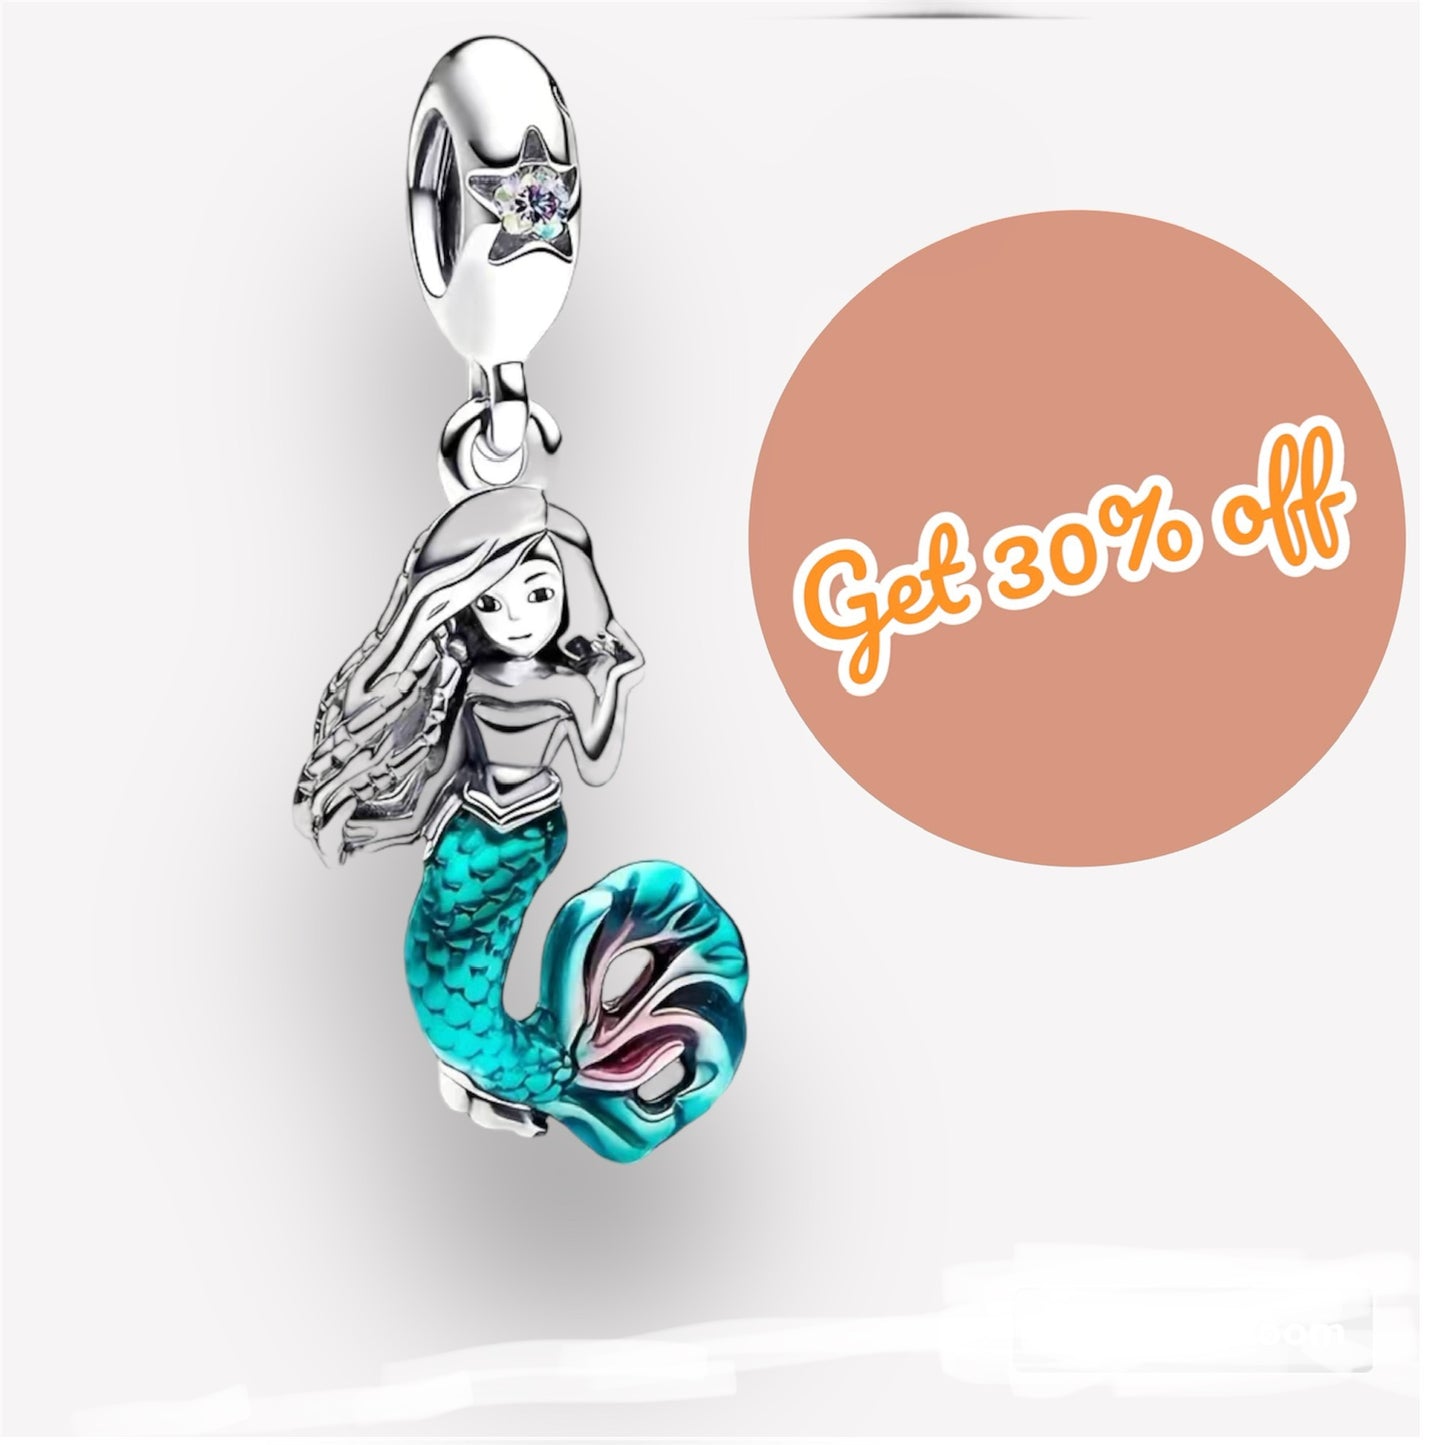 Enchanting Little Mermaid Pendant - 925 Silver, showcasing a gracefully designed mermaid silhouette, perfect for women and girls. A mythical creature-inspired pendant, a versatile accessory and thoughtful gift."